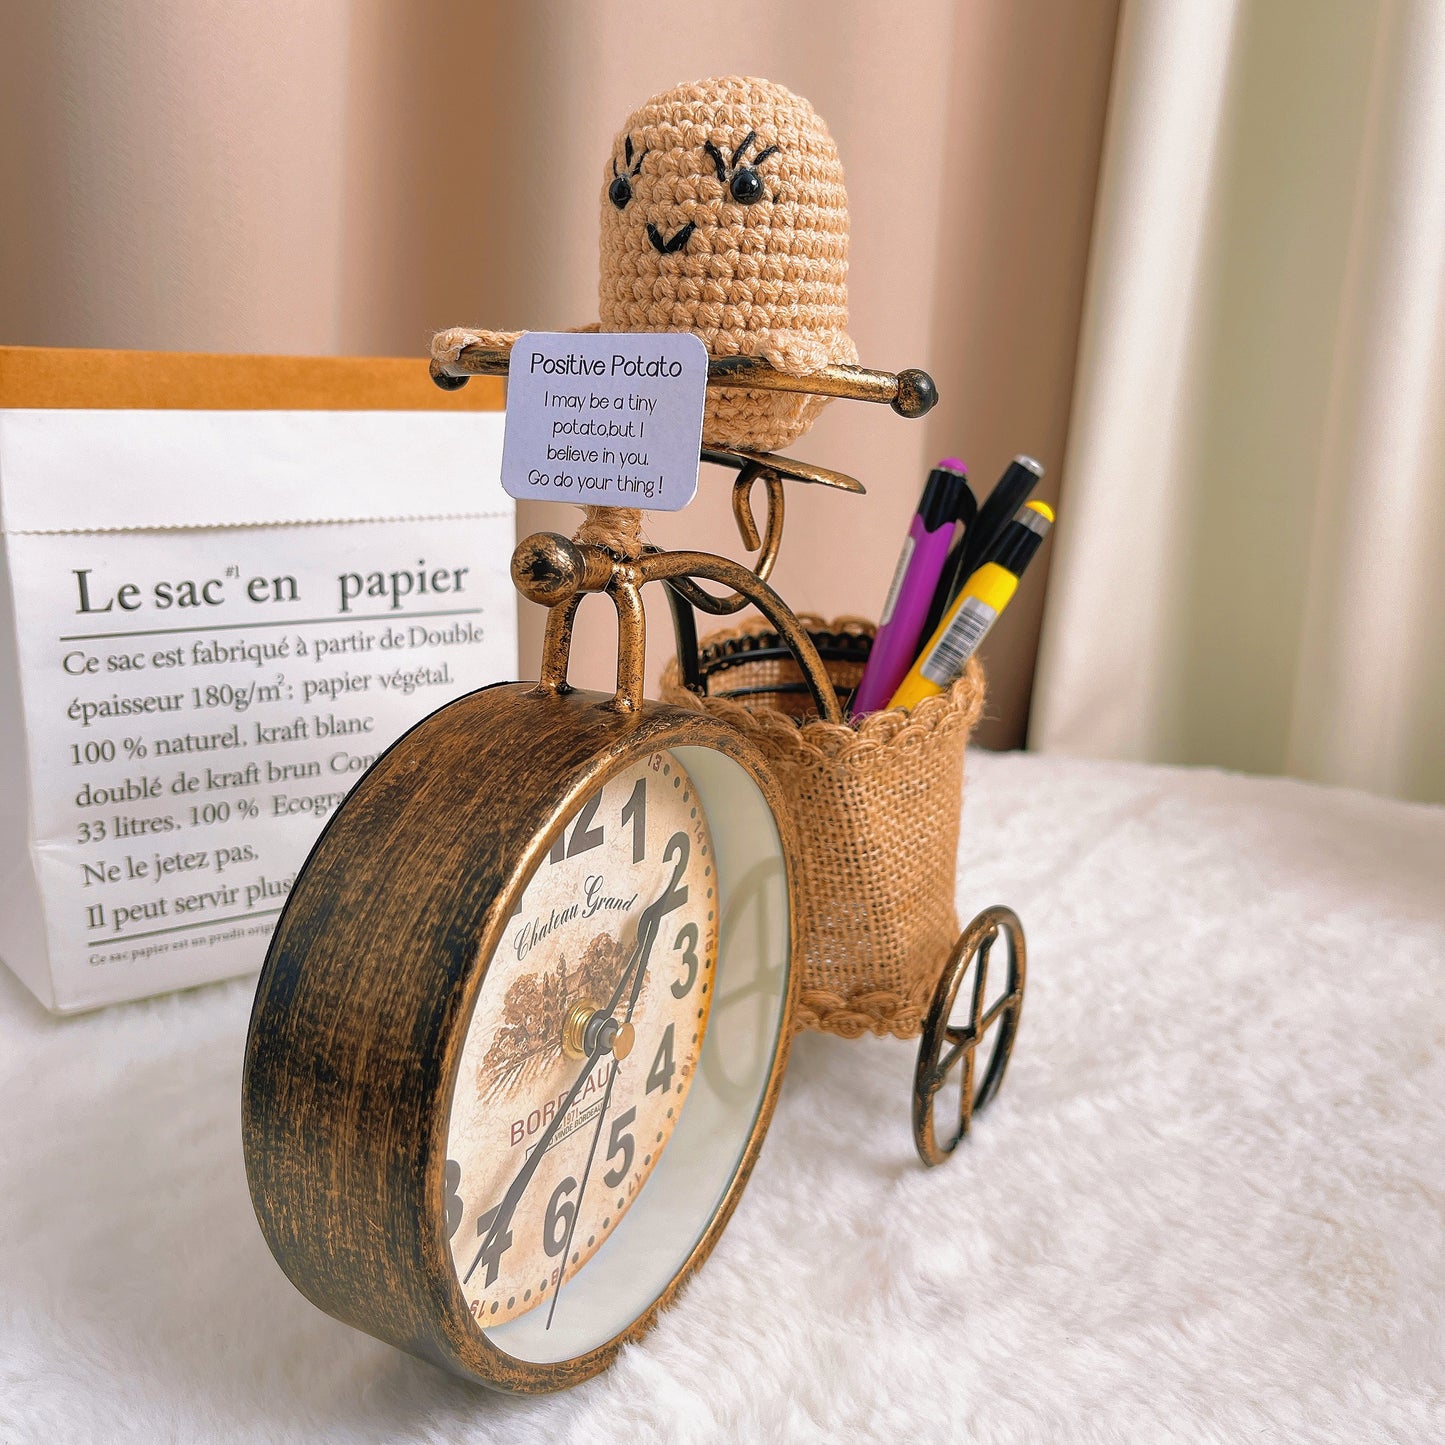 Rustic Bicycle Desk Organizer with Clock with Customizable Positive Potato Plushie